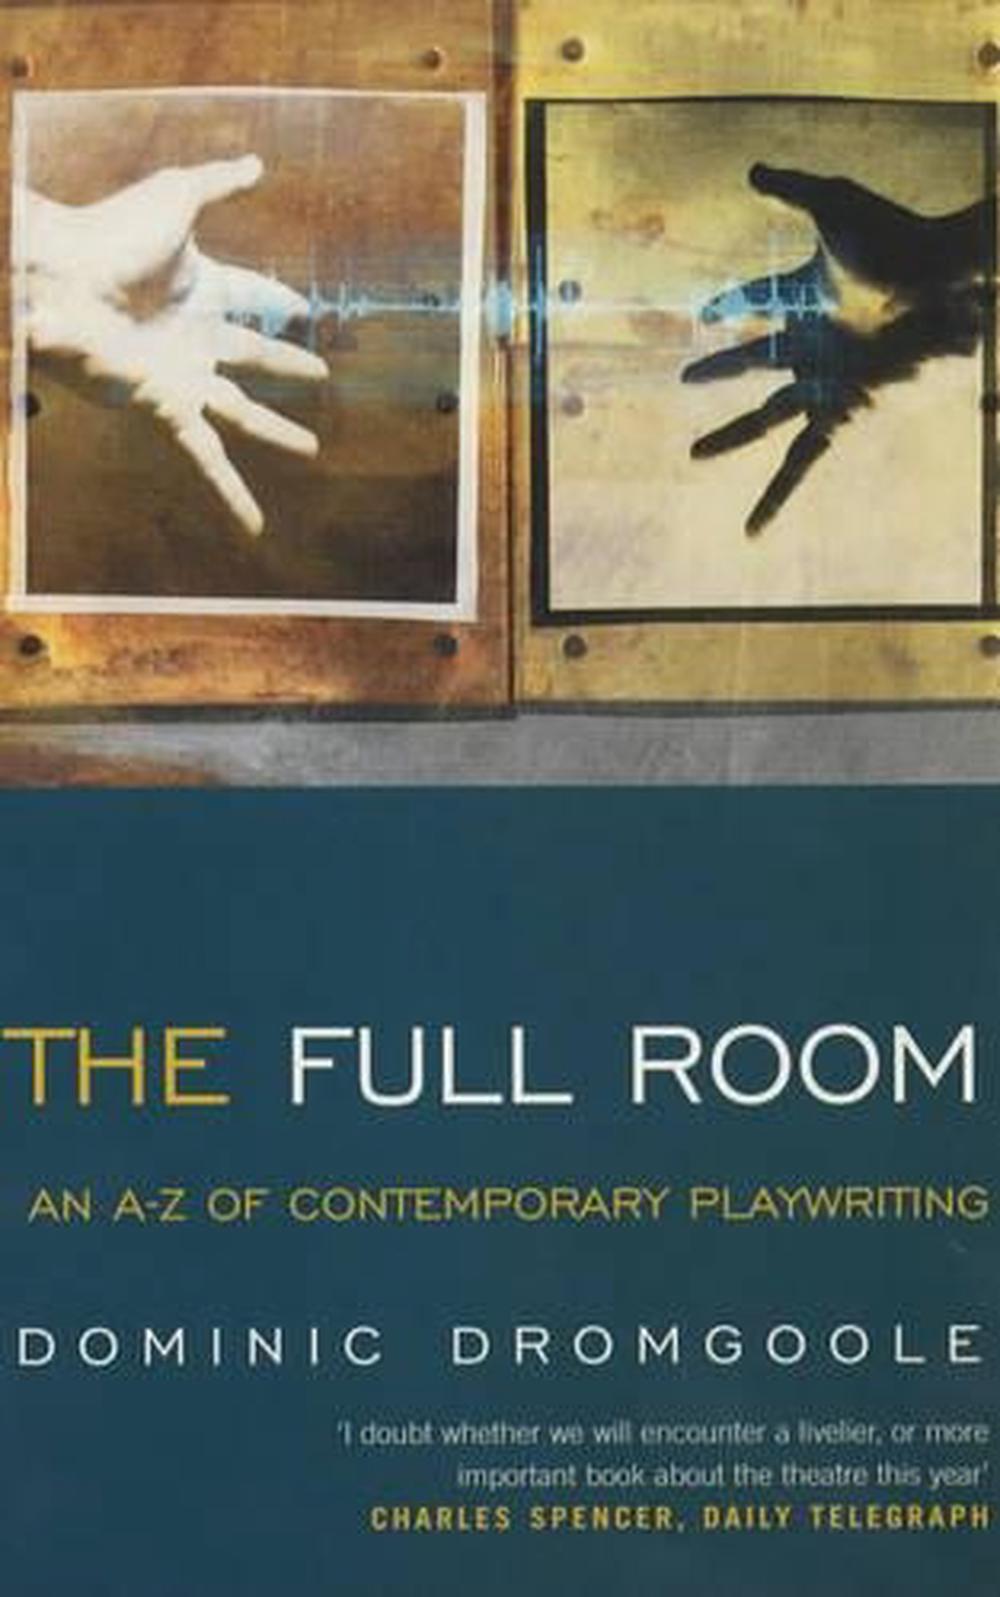 The Full Room An AZ of Contemporary Playwriting by Dominic Dromgoole